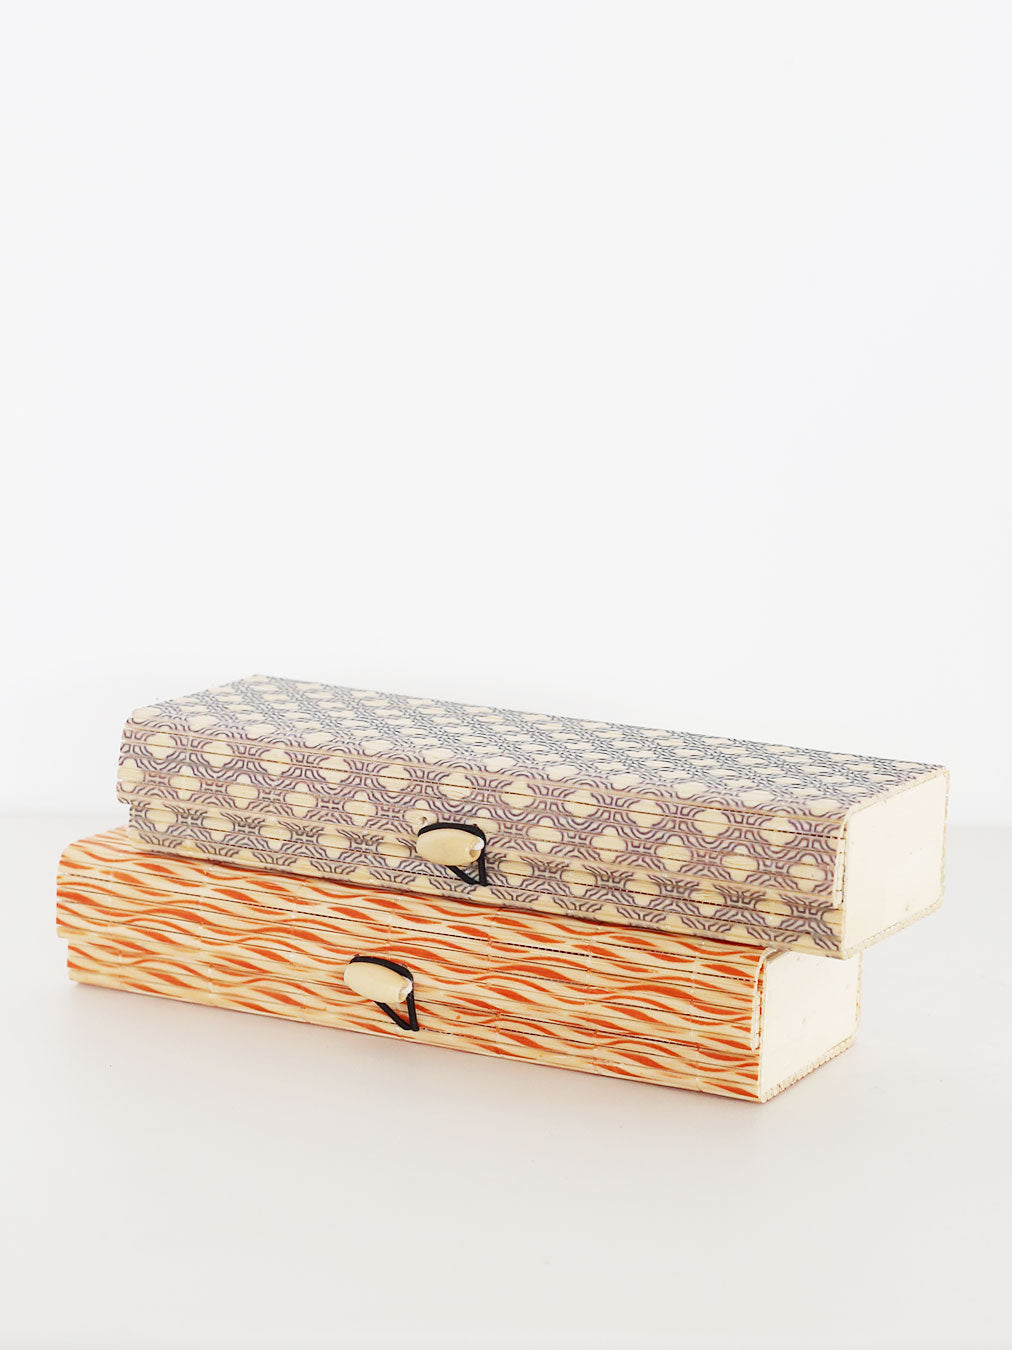 Natural bamboo box for storage and as spectacle case